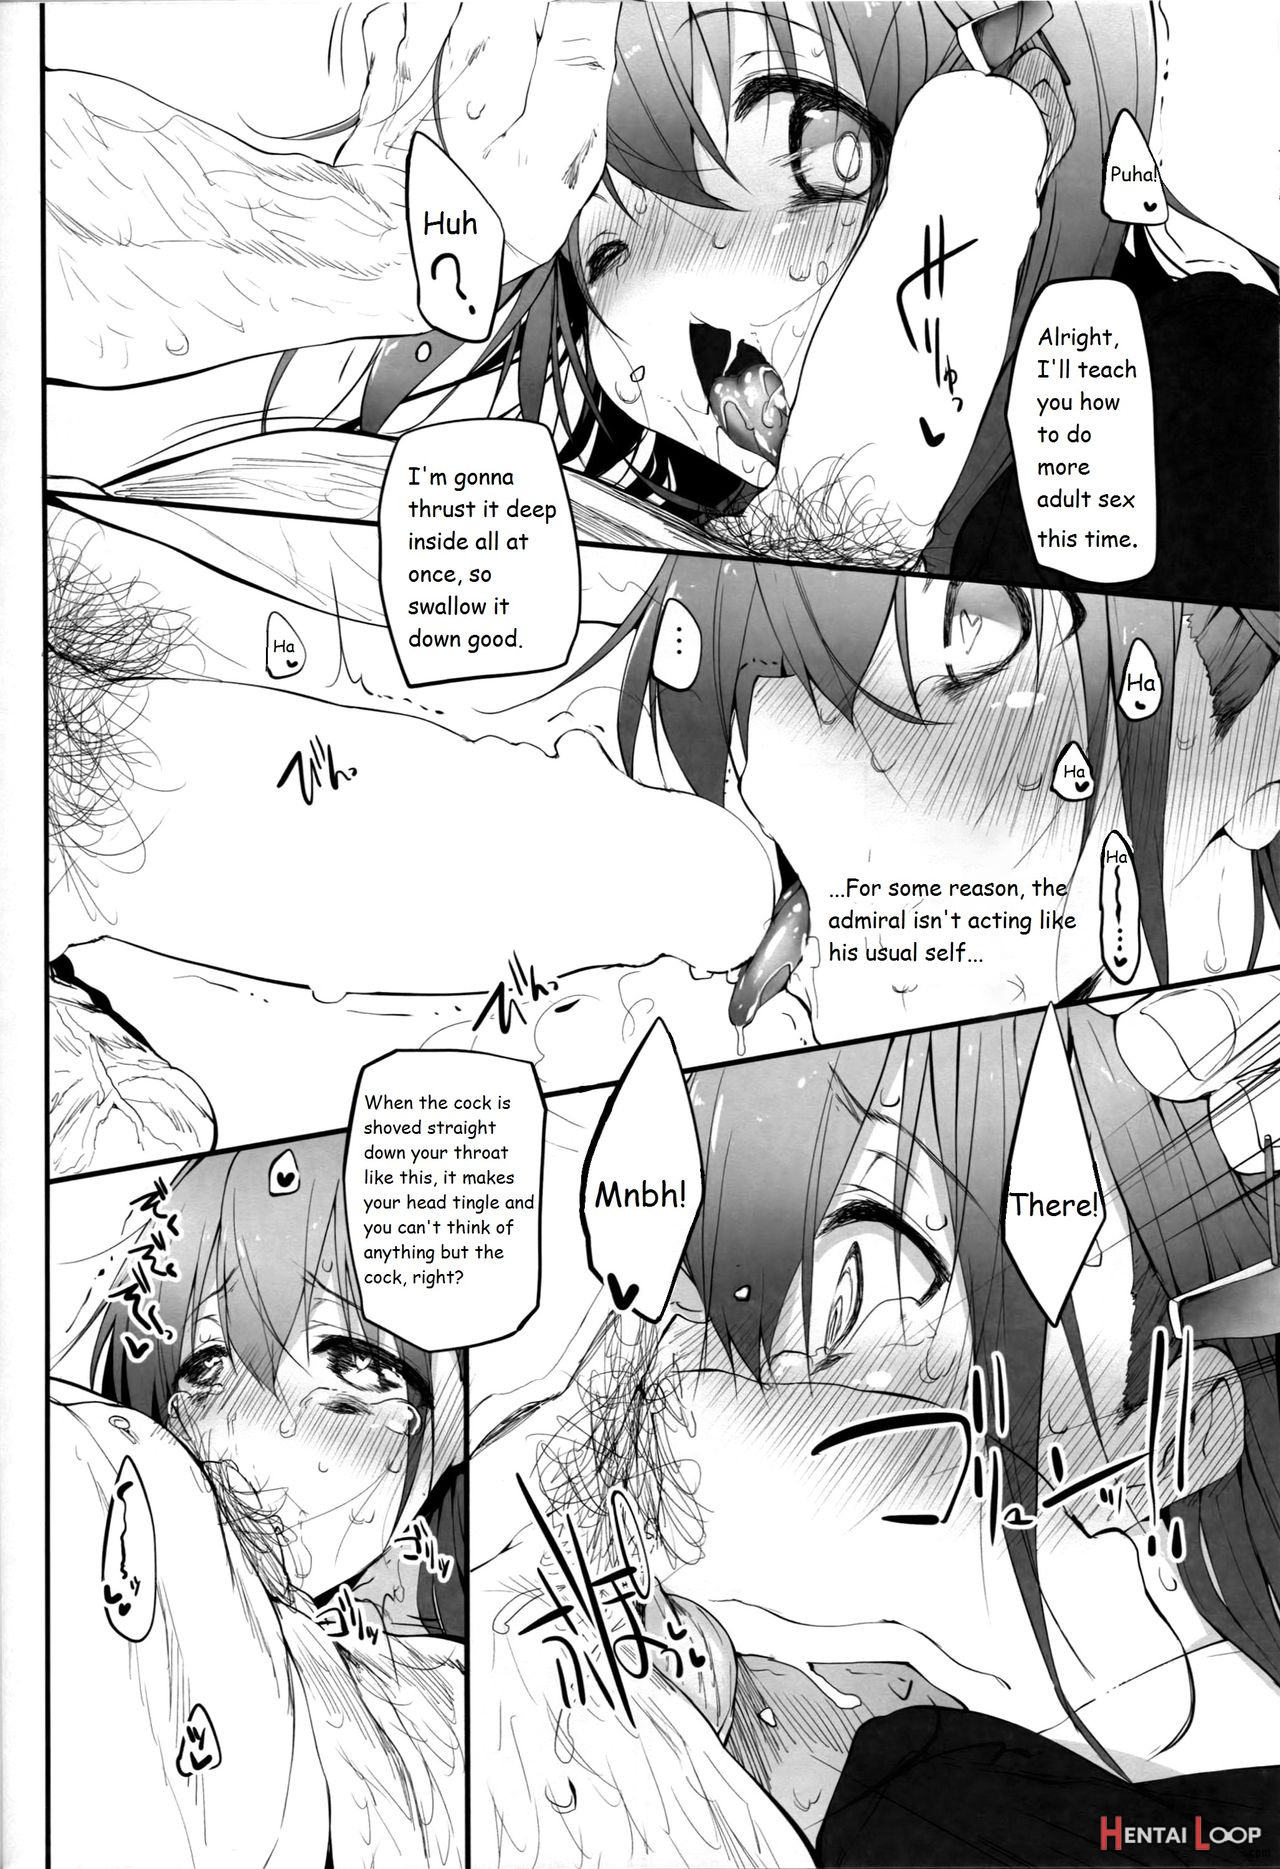 Marked Girls Vol. 1 page 10